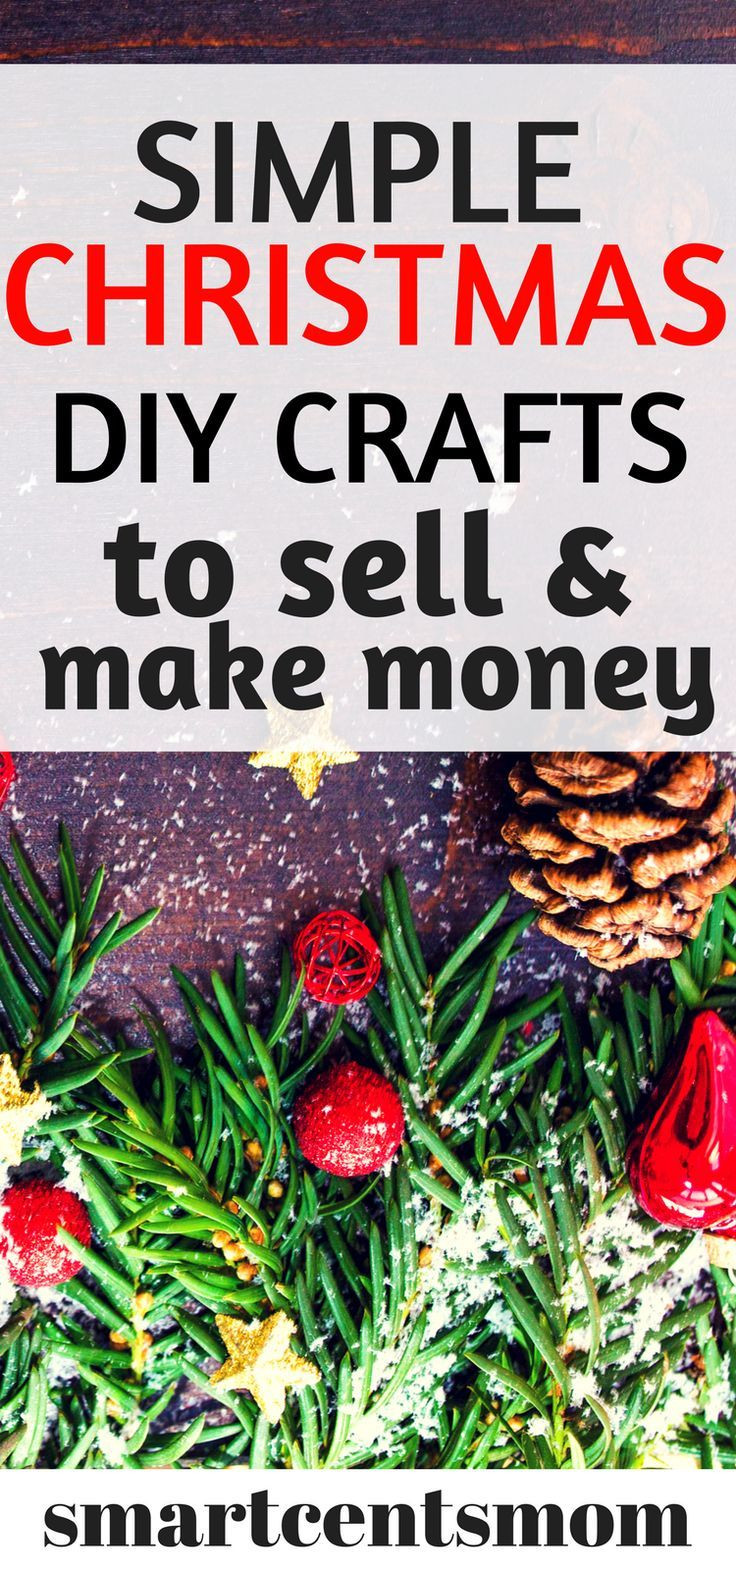 DIY Christmas Crafts To Sell
 Make money selling easy DIY Christmas crafts this holiday